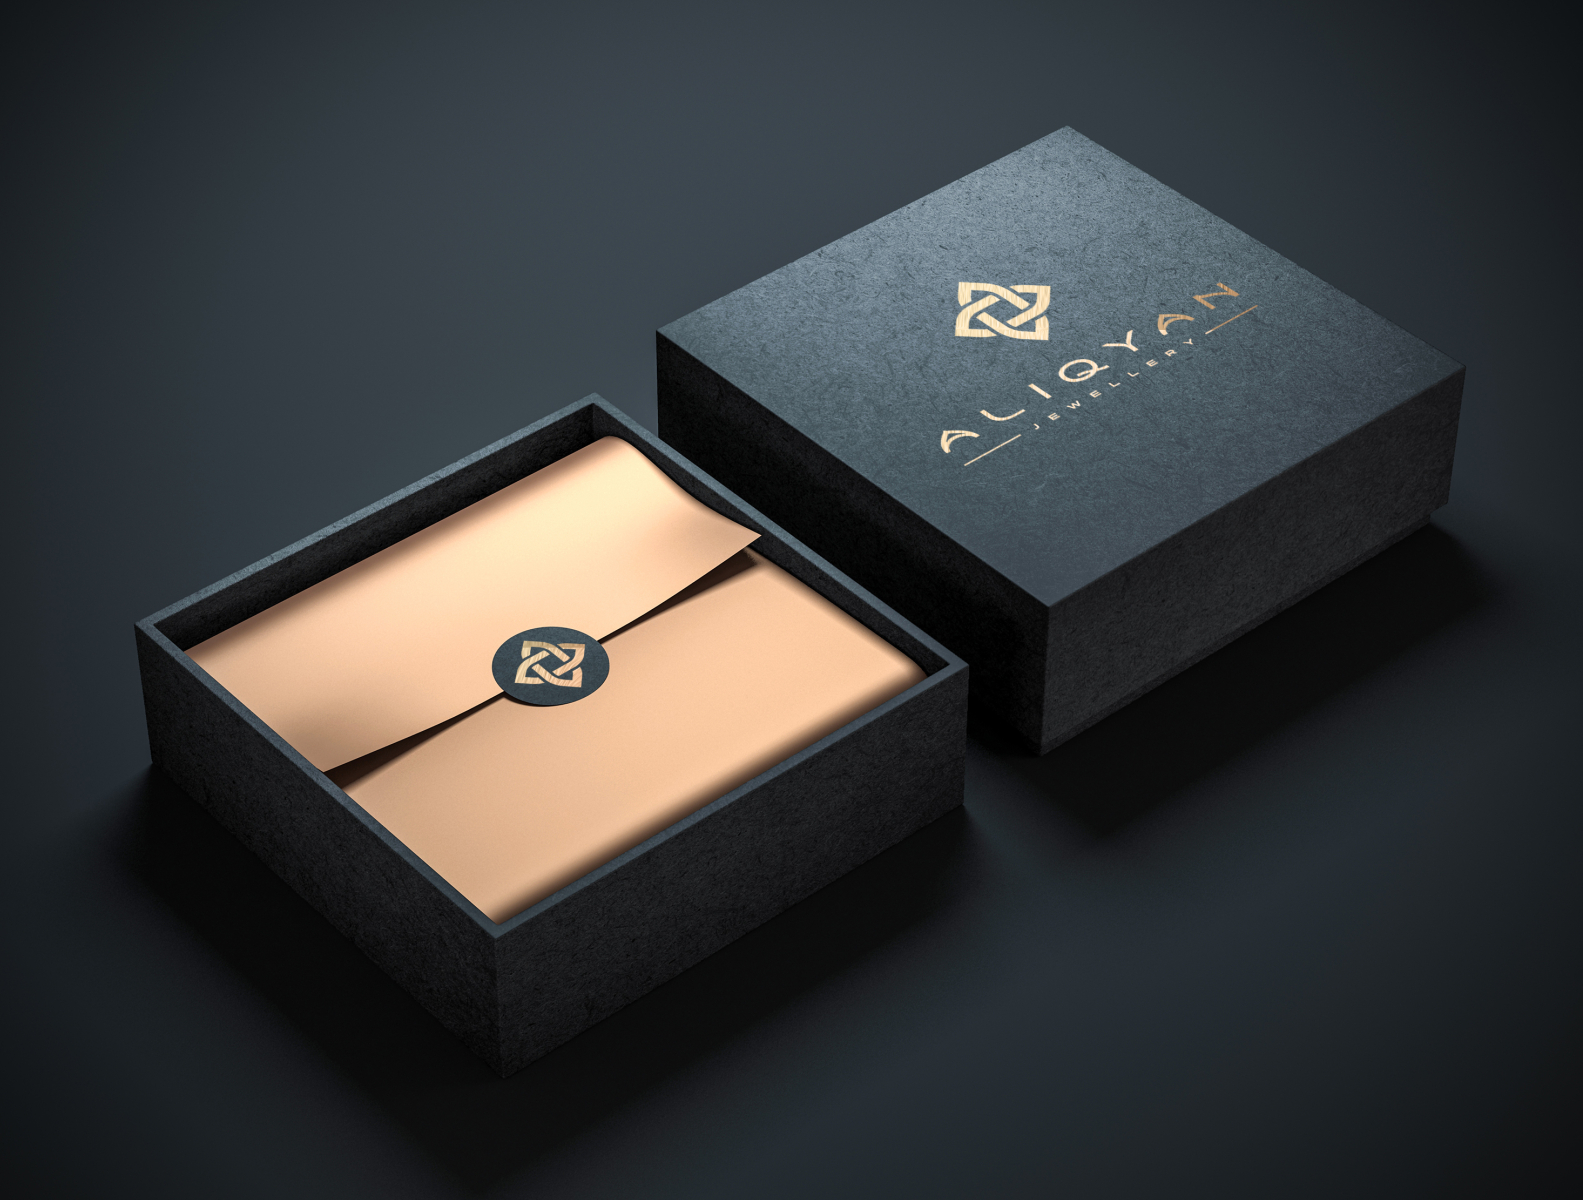 Download Luxury Box Mockup ALIQYAN Packaging Design by PANTER on Dribbble